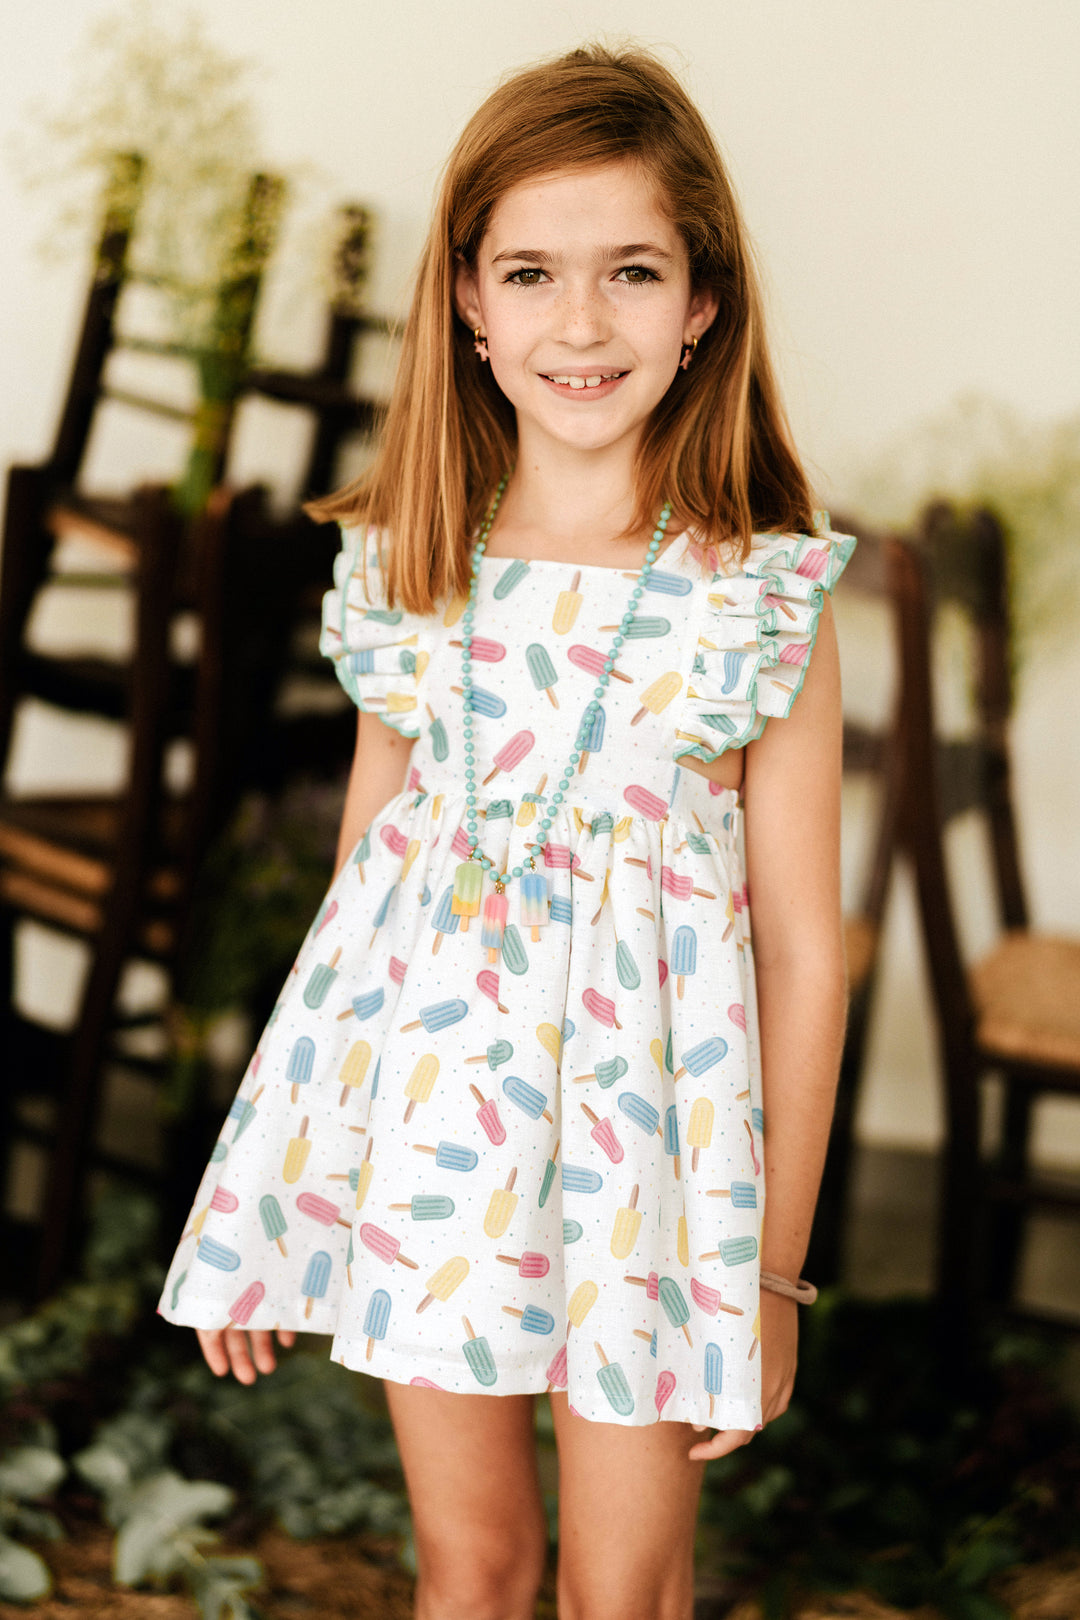 Mon Petit Bonbon "Skye" Ice Lolly Print Dress & Bloomers | iphoneandroidapplications